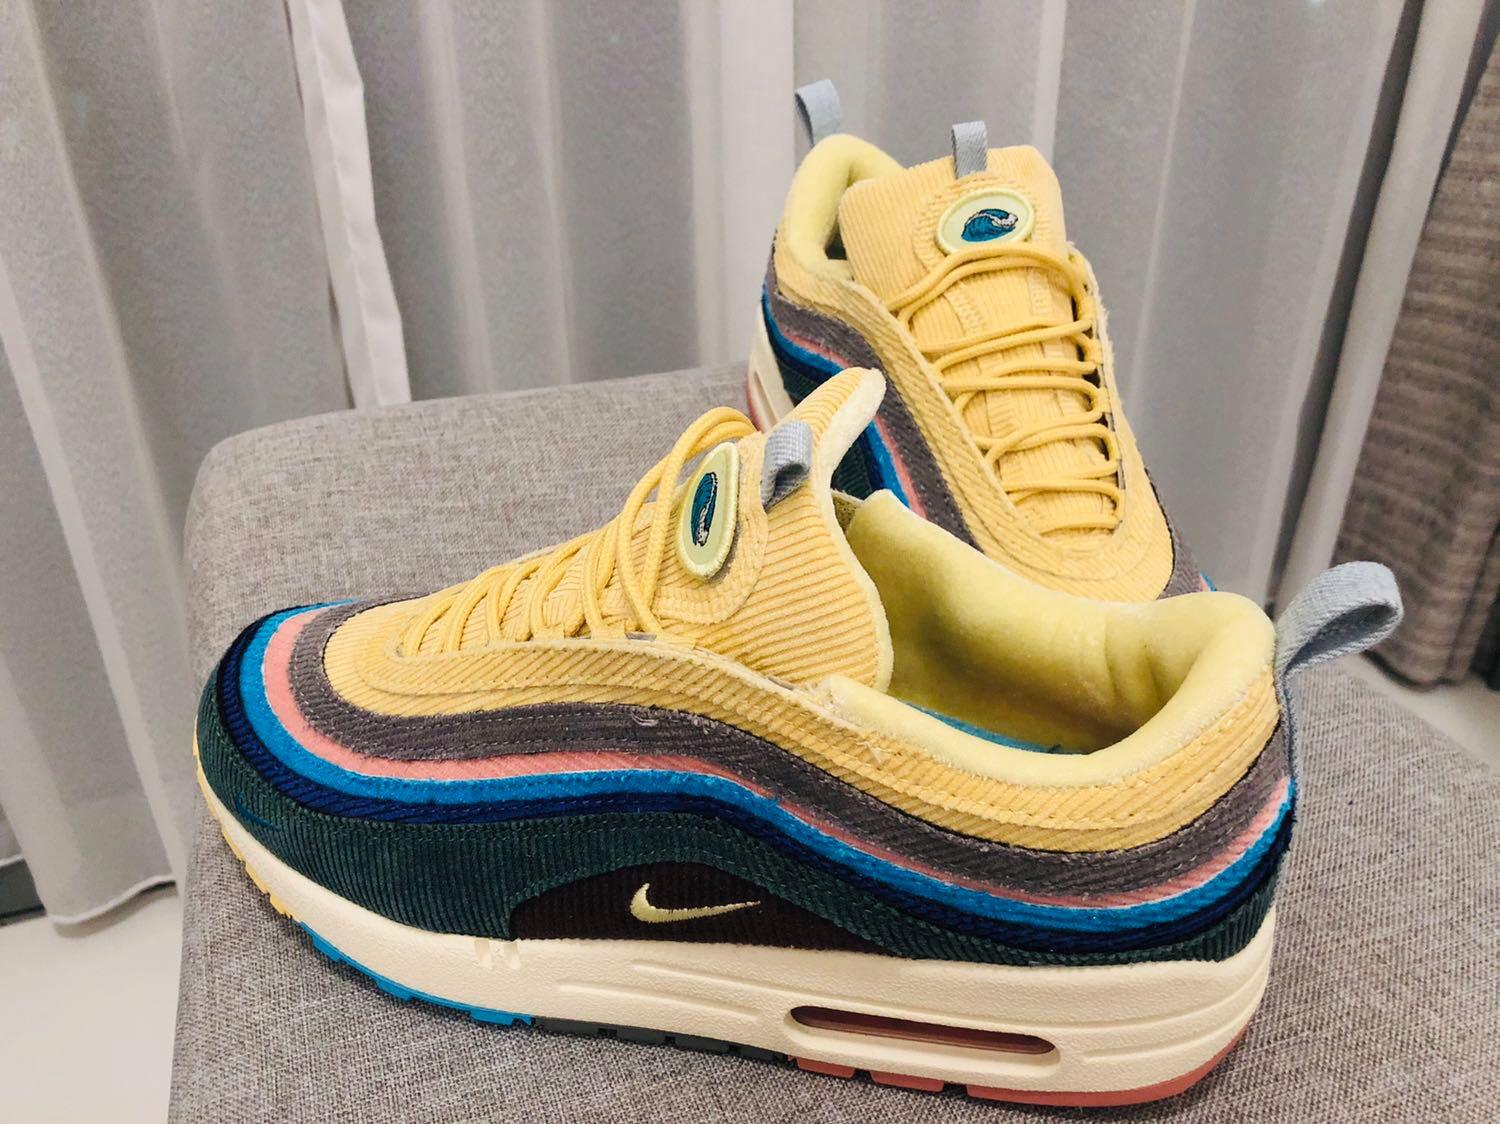 Sean Witherspoon Air Max 97, Men's 